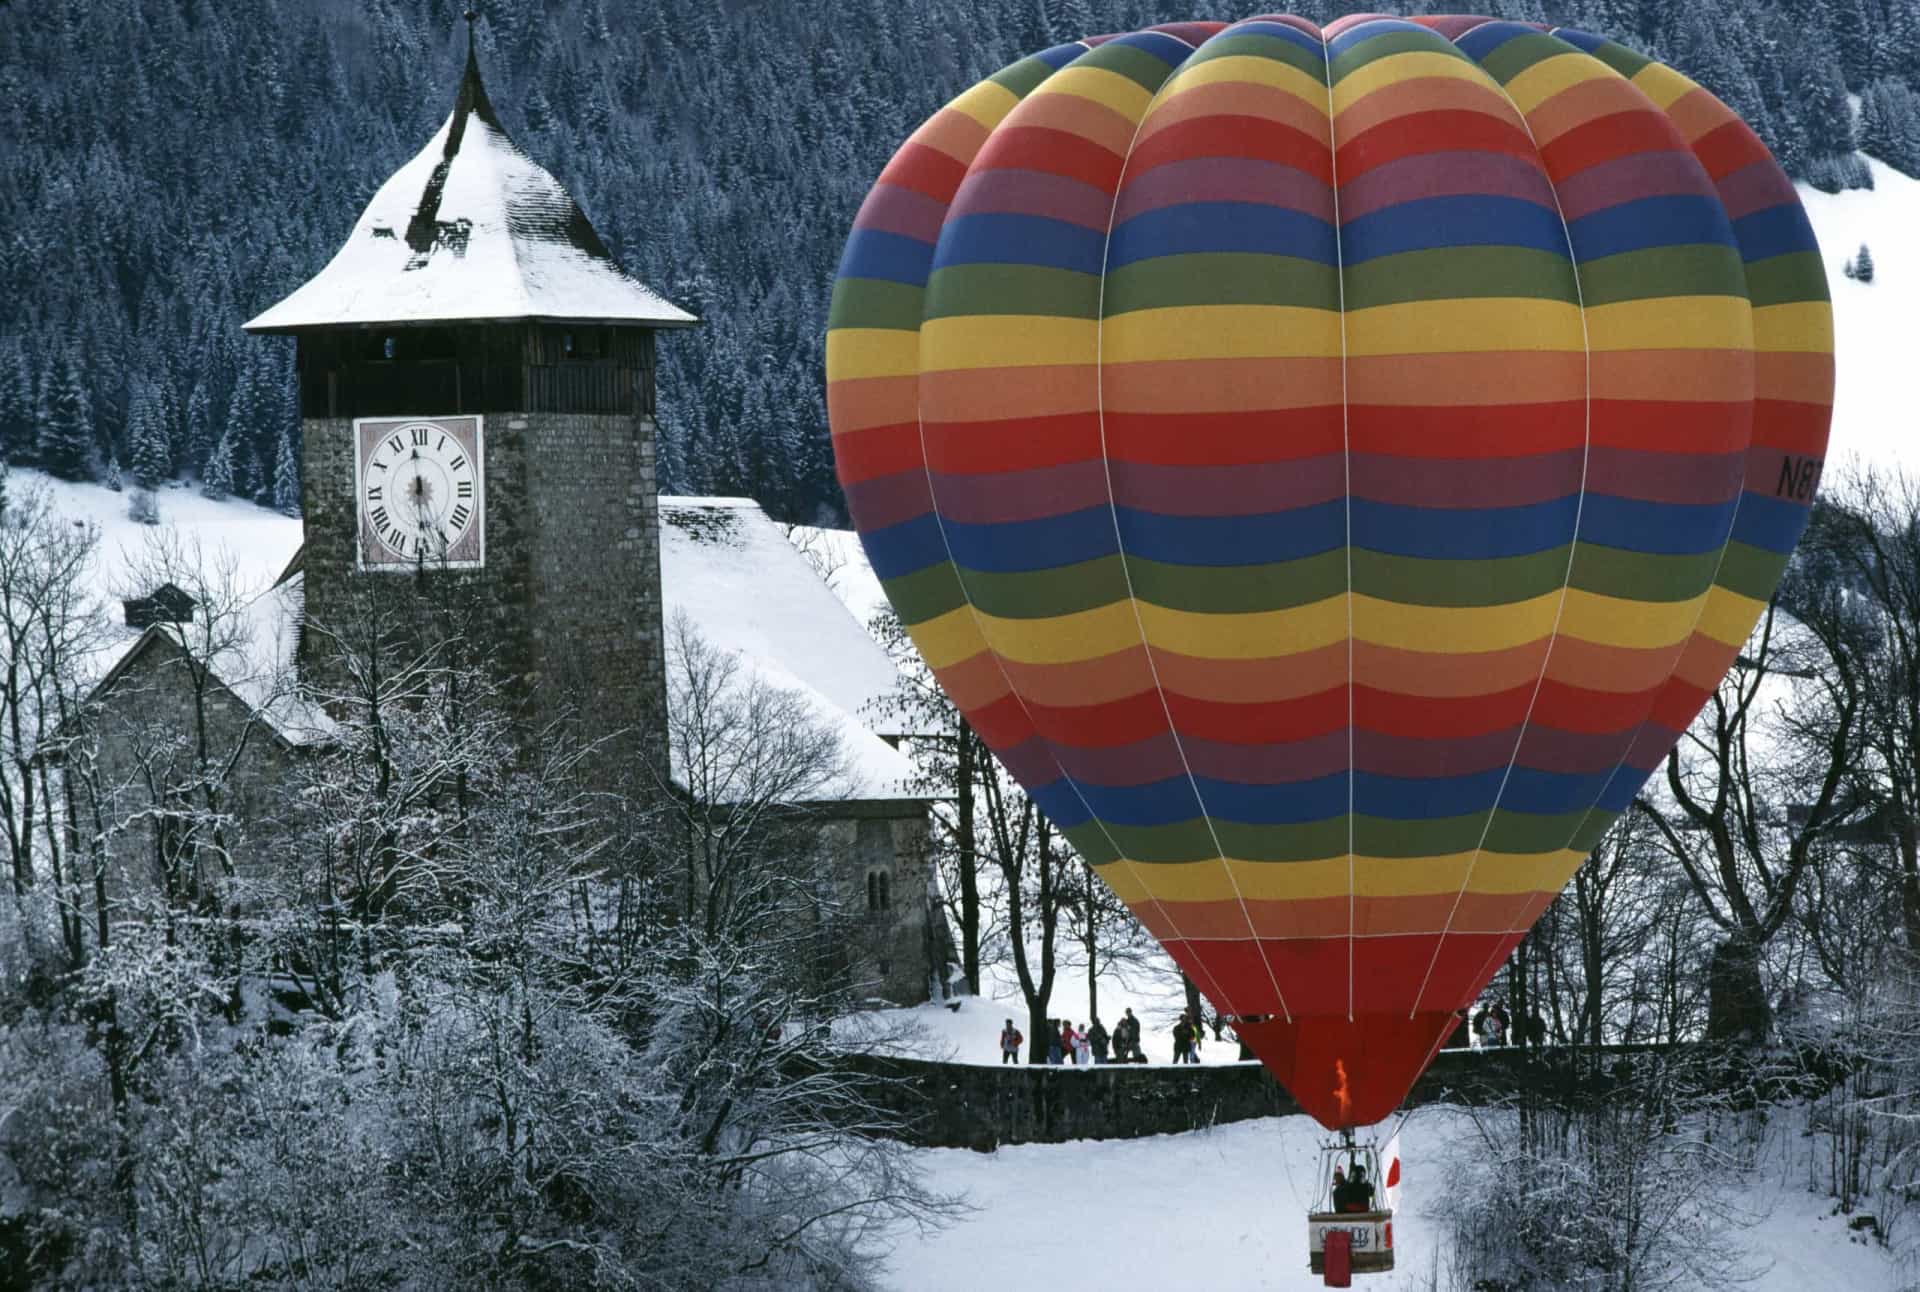 <p>The country is mostly known for its ski resorts, but in 1989 the International Hot Air Balloon Festival also attracted many visitors.</p>